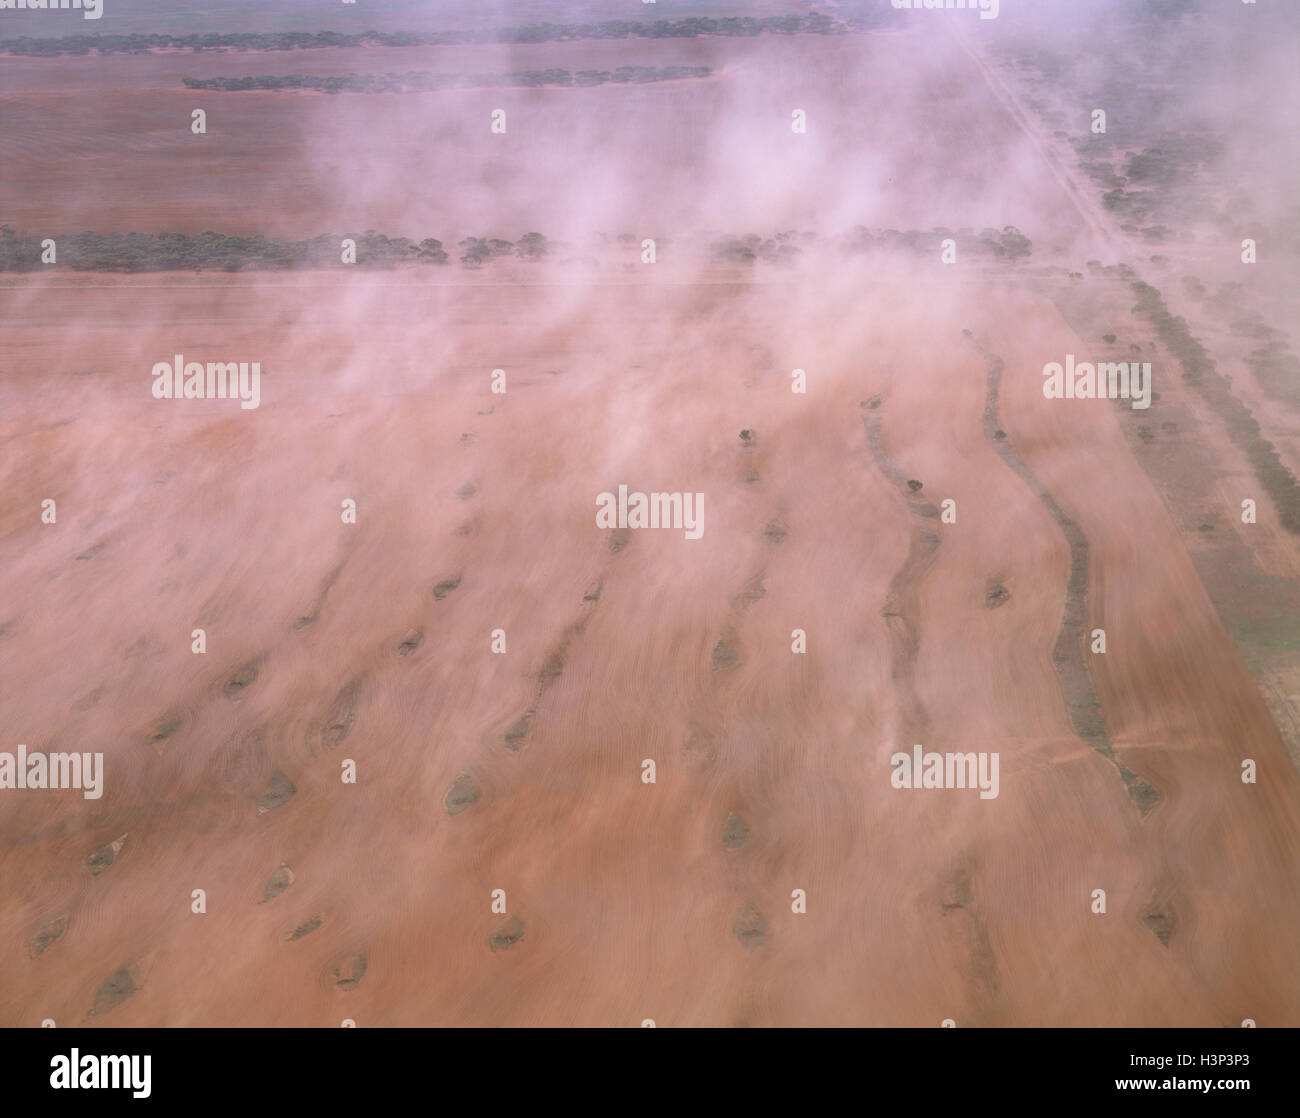 Topsoil erosion, soil being blown away by wind. Stock Photo